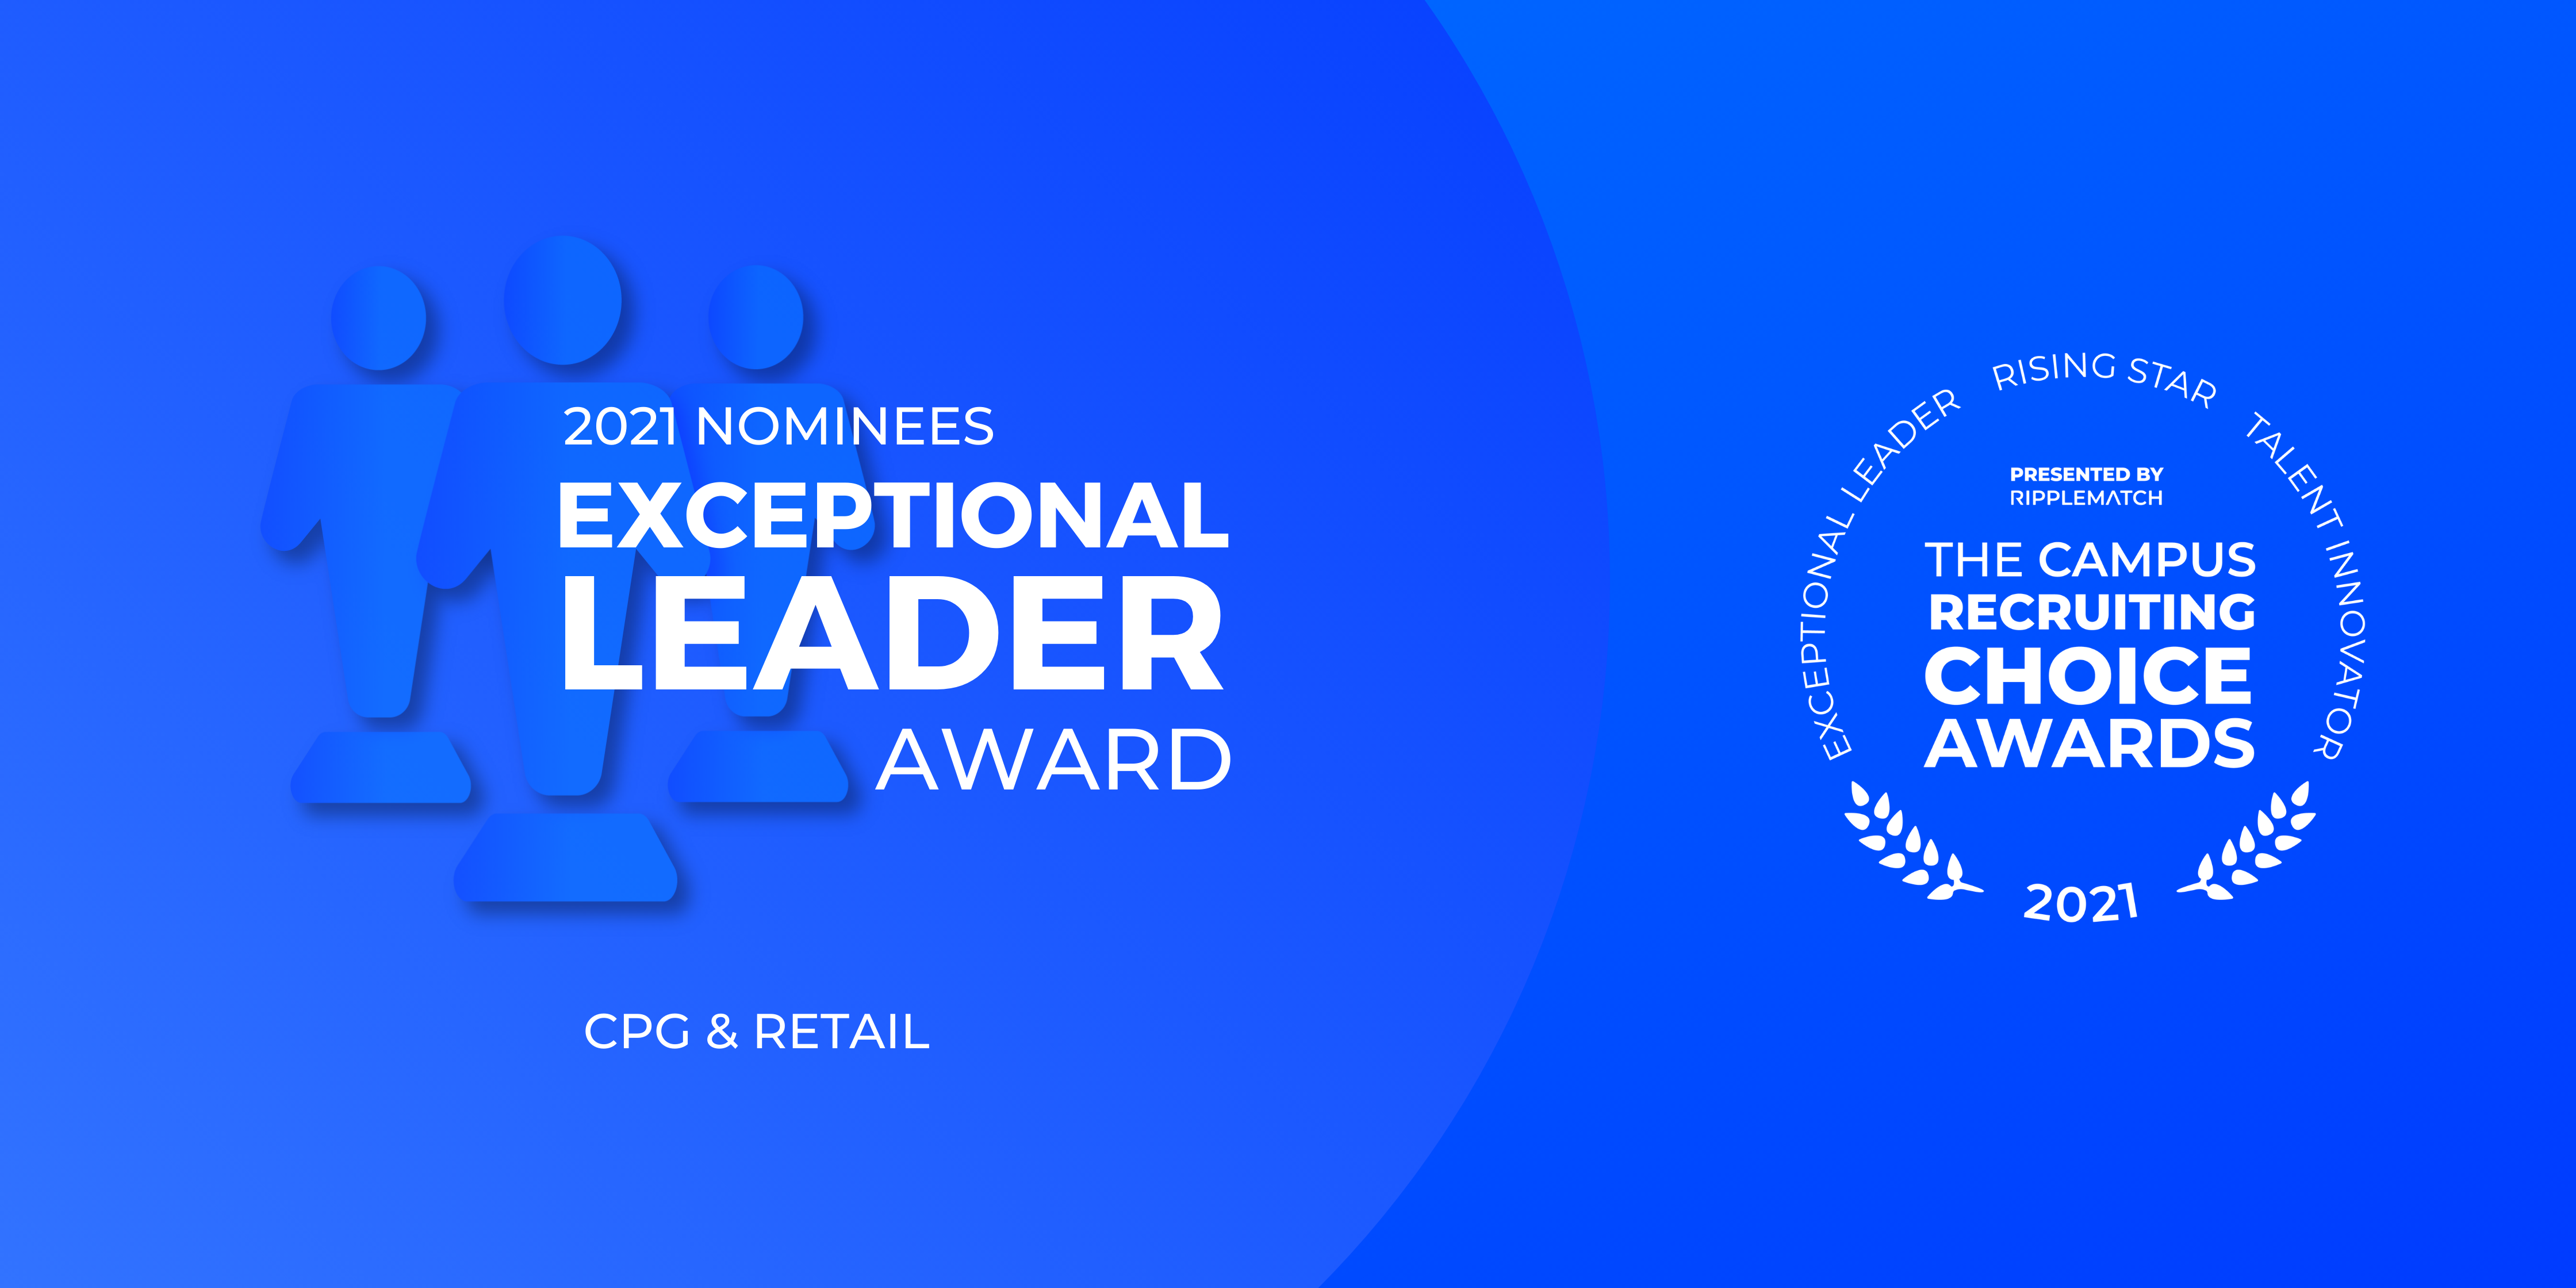 Exceptional Leader Award - CPG & Retail